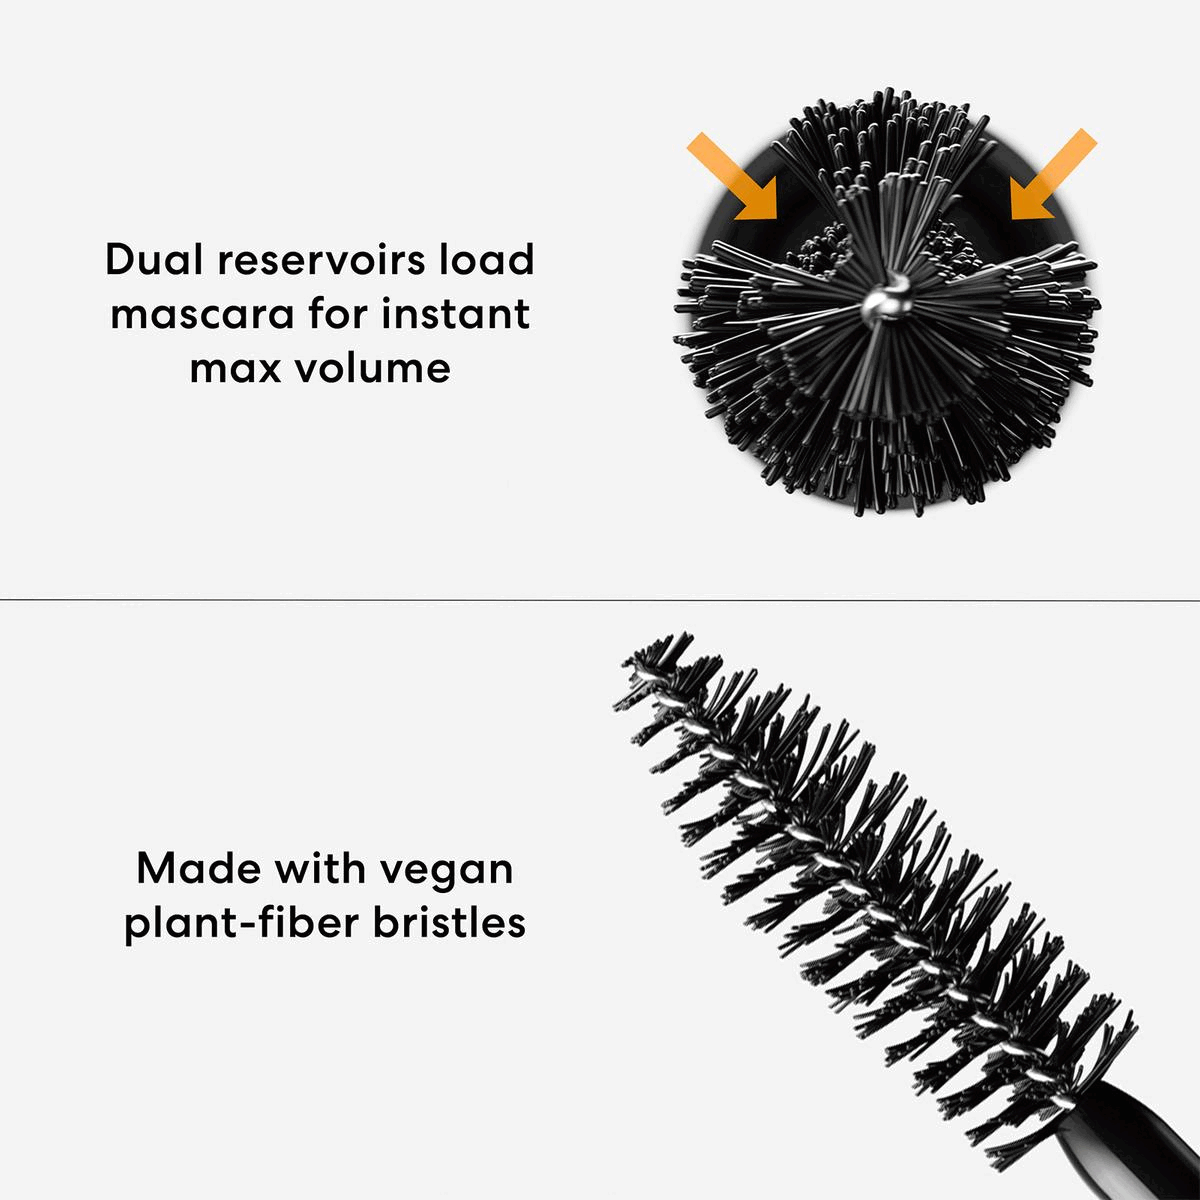 Image 1, dual reservoirs load mascara for instant max volume. made with vegan plant-fiber bristles. Image 2, available in 2 sizes, full and mini